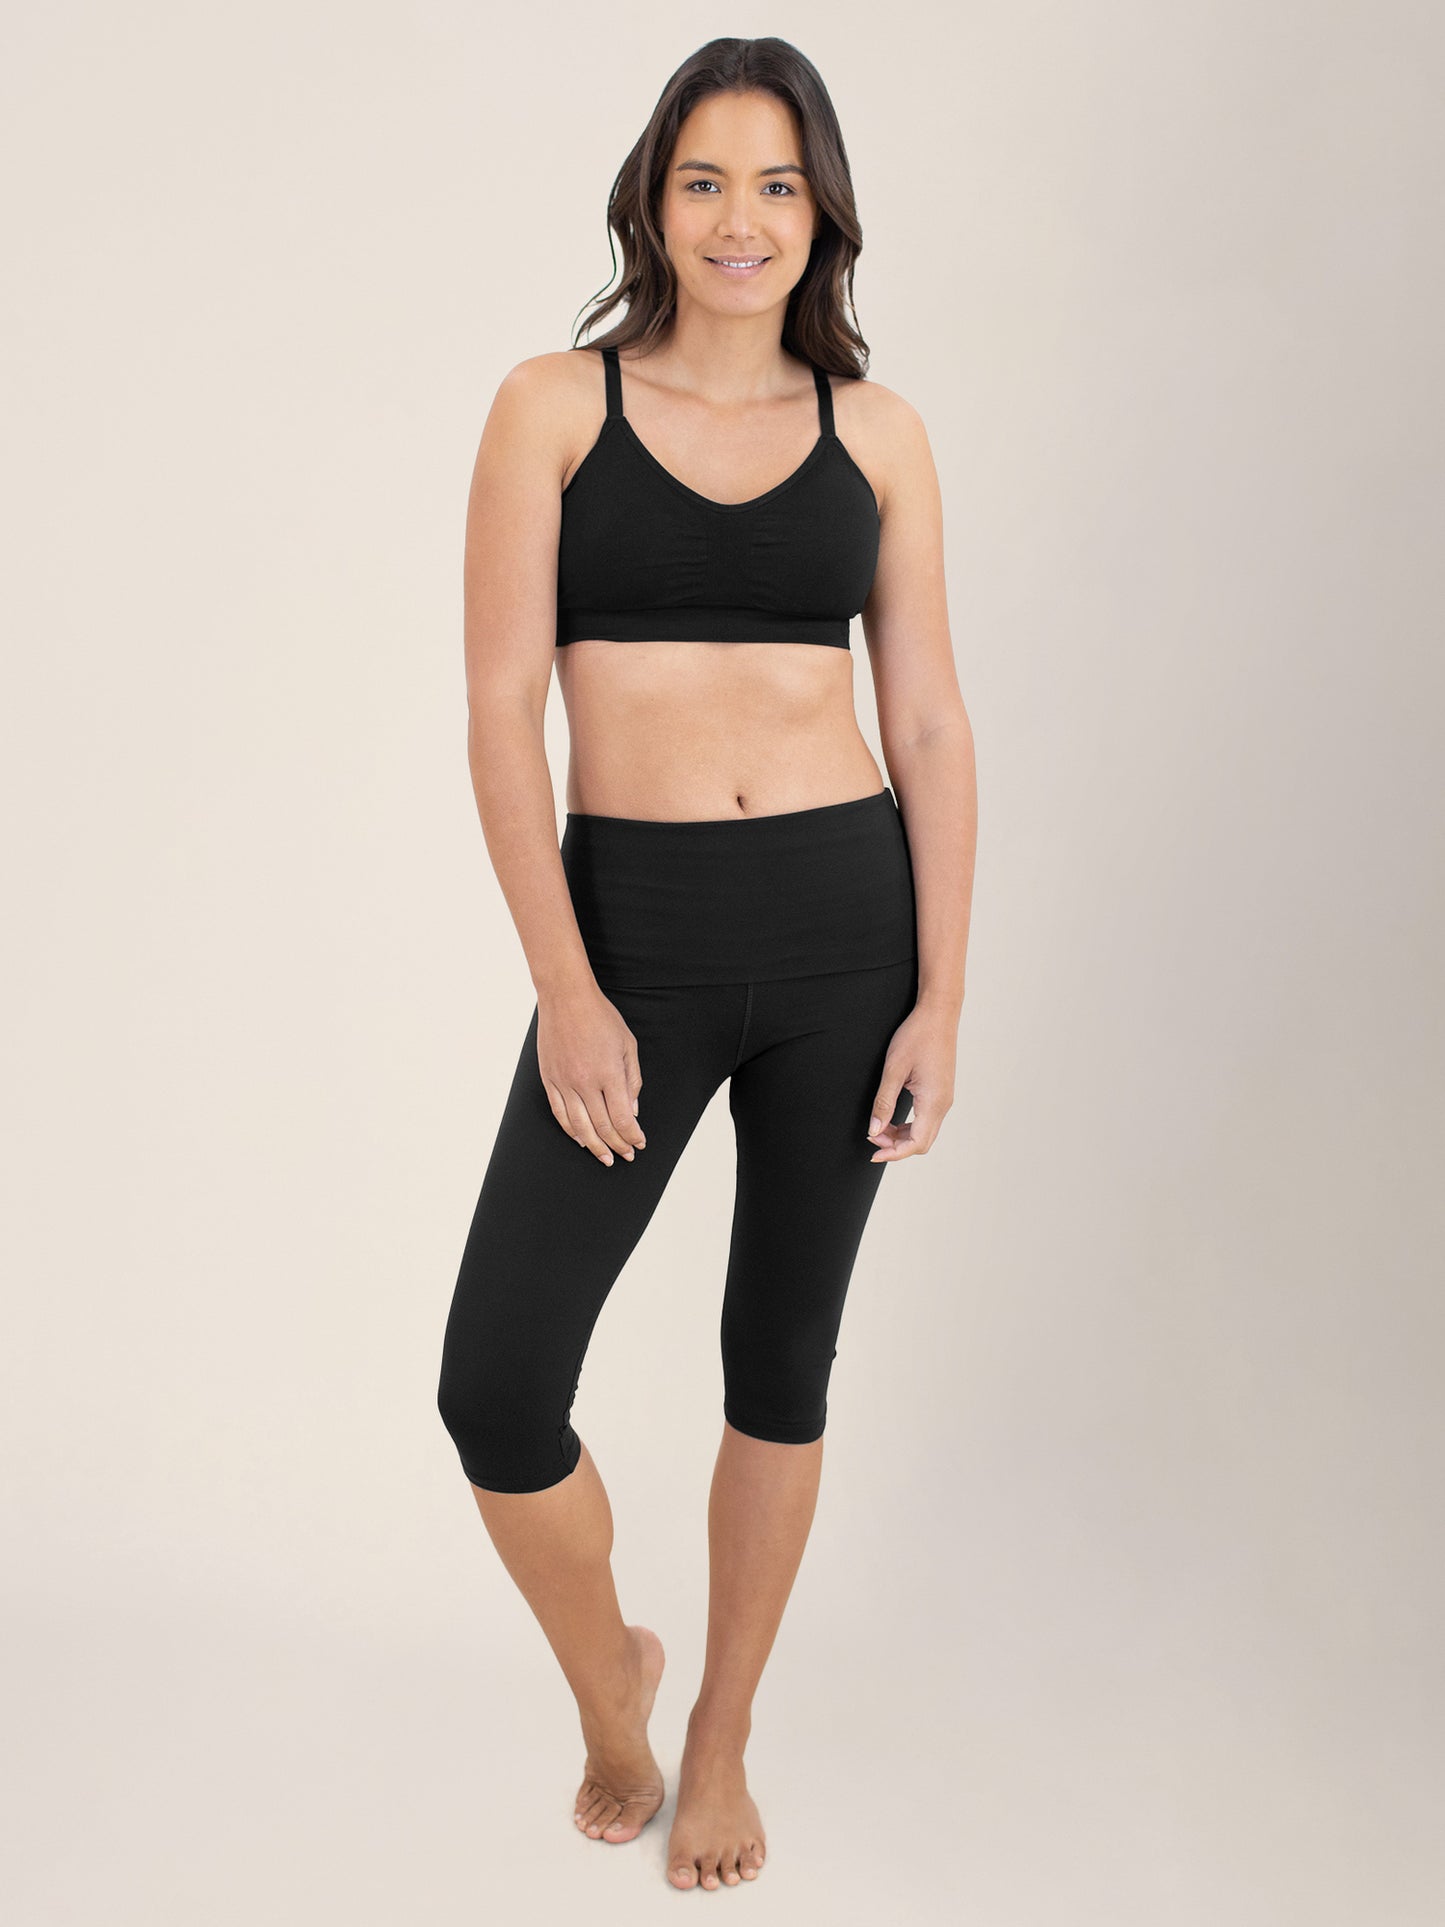 Model standing with her weight more on one leg with her hands at her sides wearing the Diana Sublime® Sports Bra in Black@model_info:Cristy is wearing a Small. 